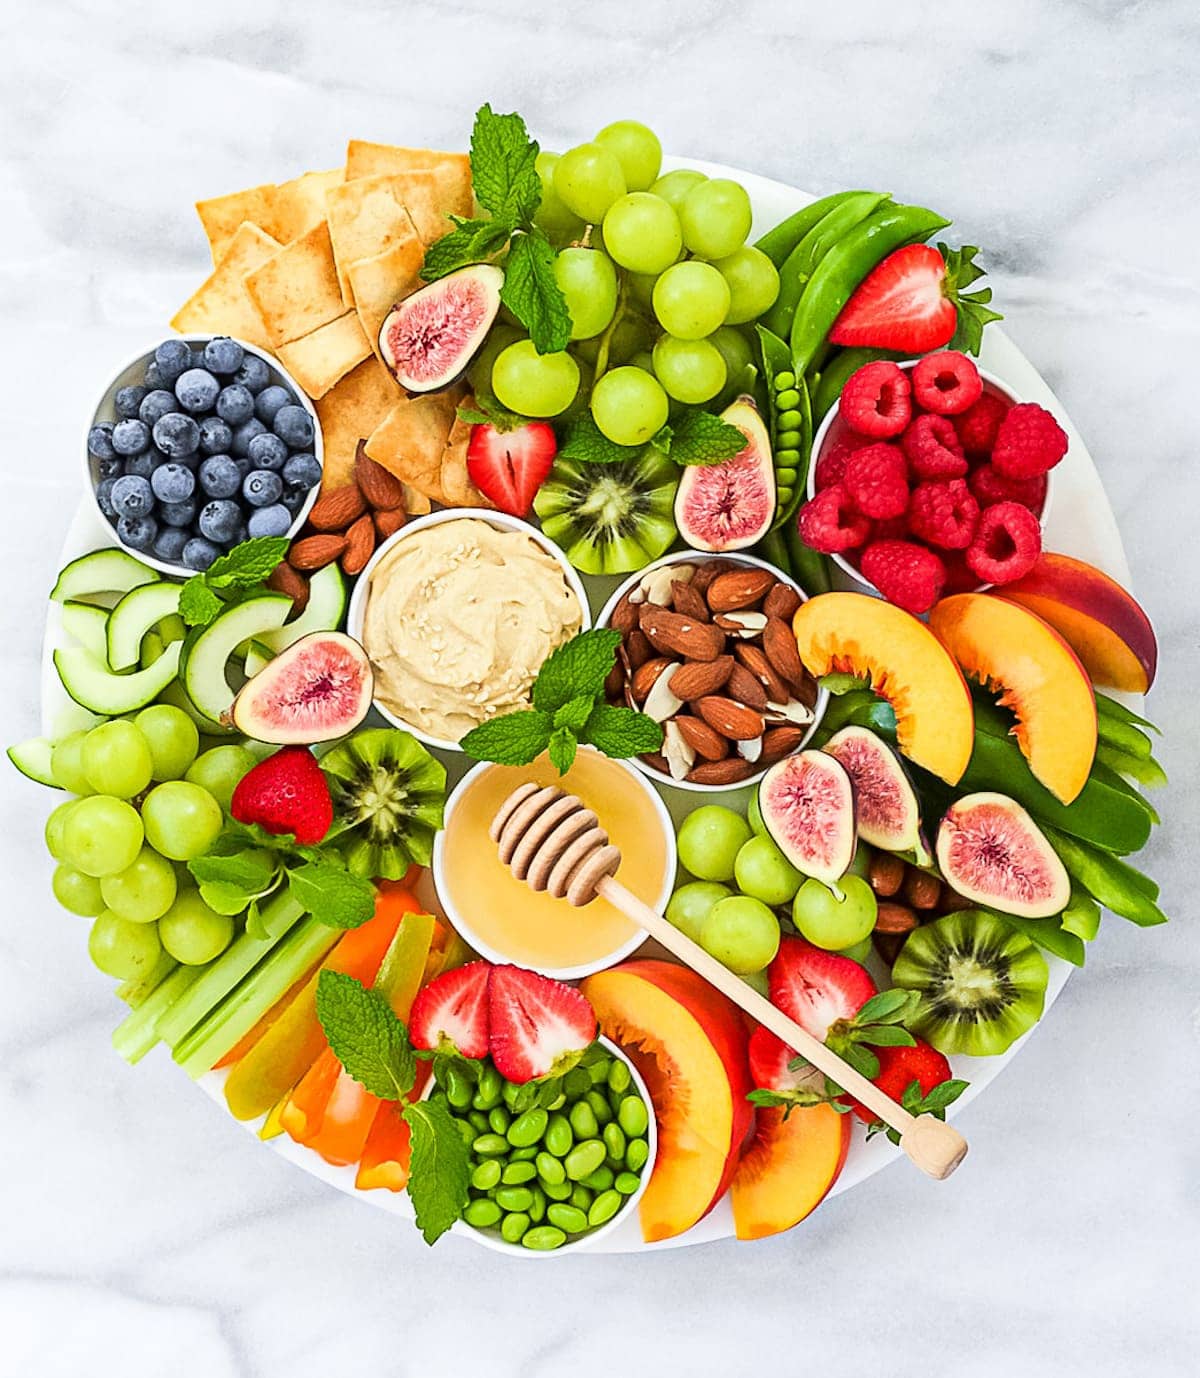 A vegertarian charcuterie board featuring vibrant fresh produce including raspberries, grapes, kiwis, blueberries, cucumbers, peaches, celery and much more.